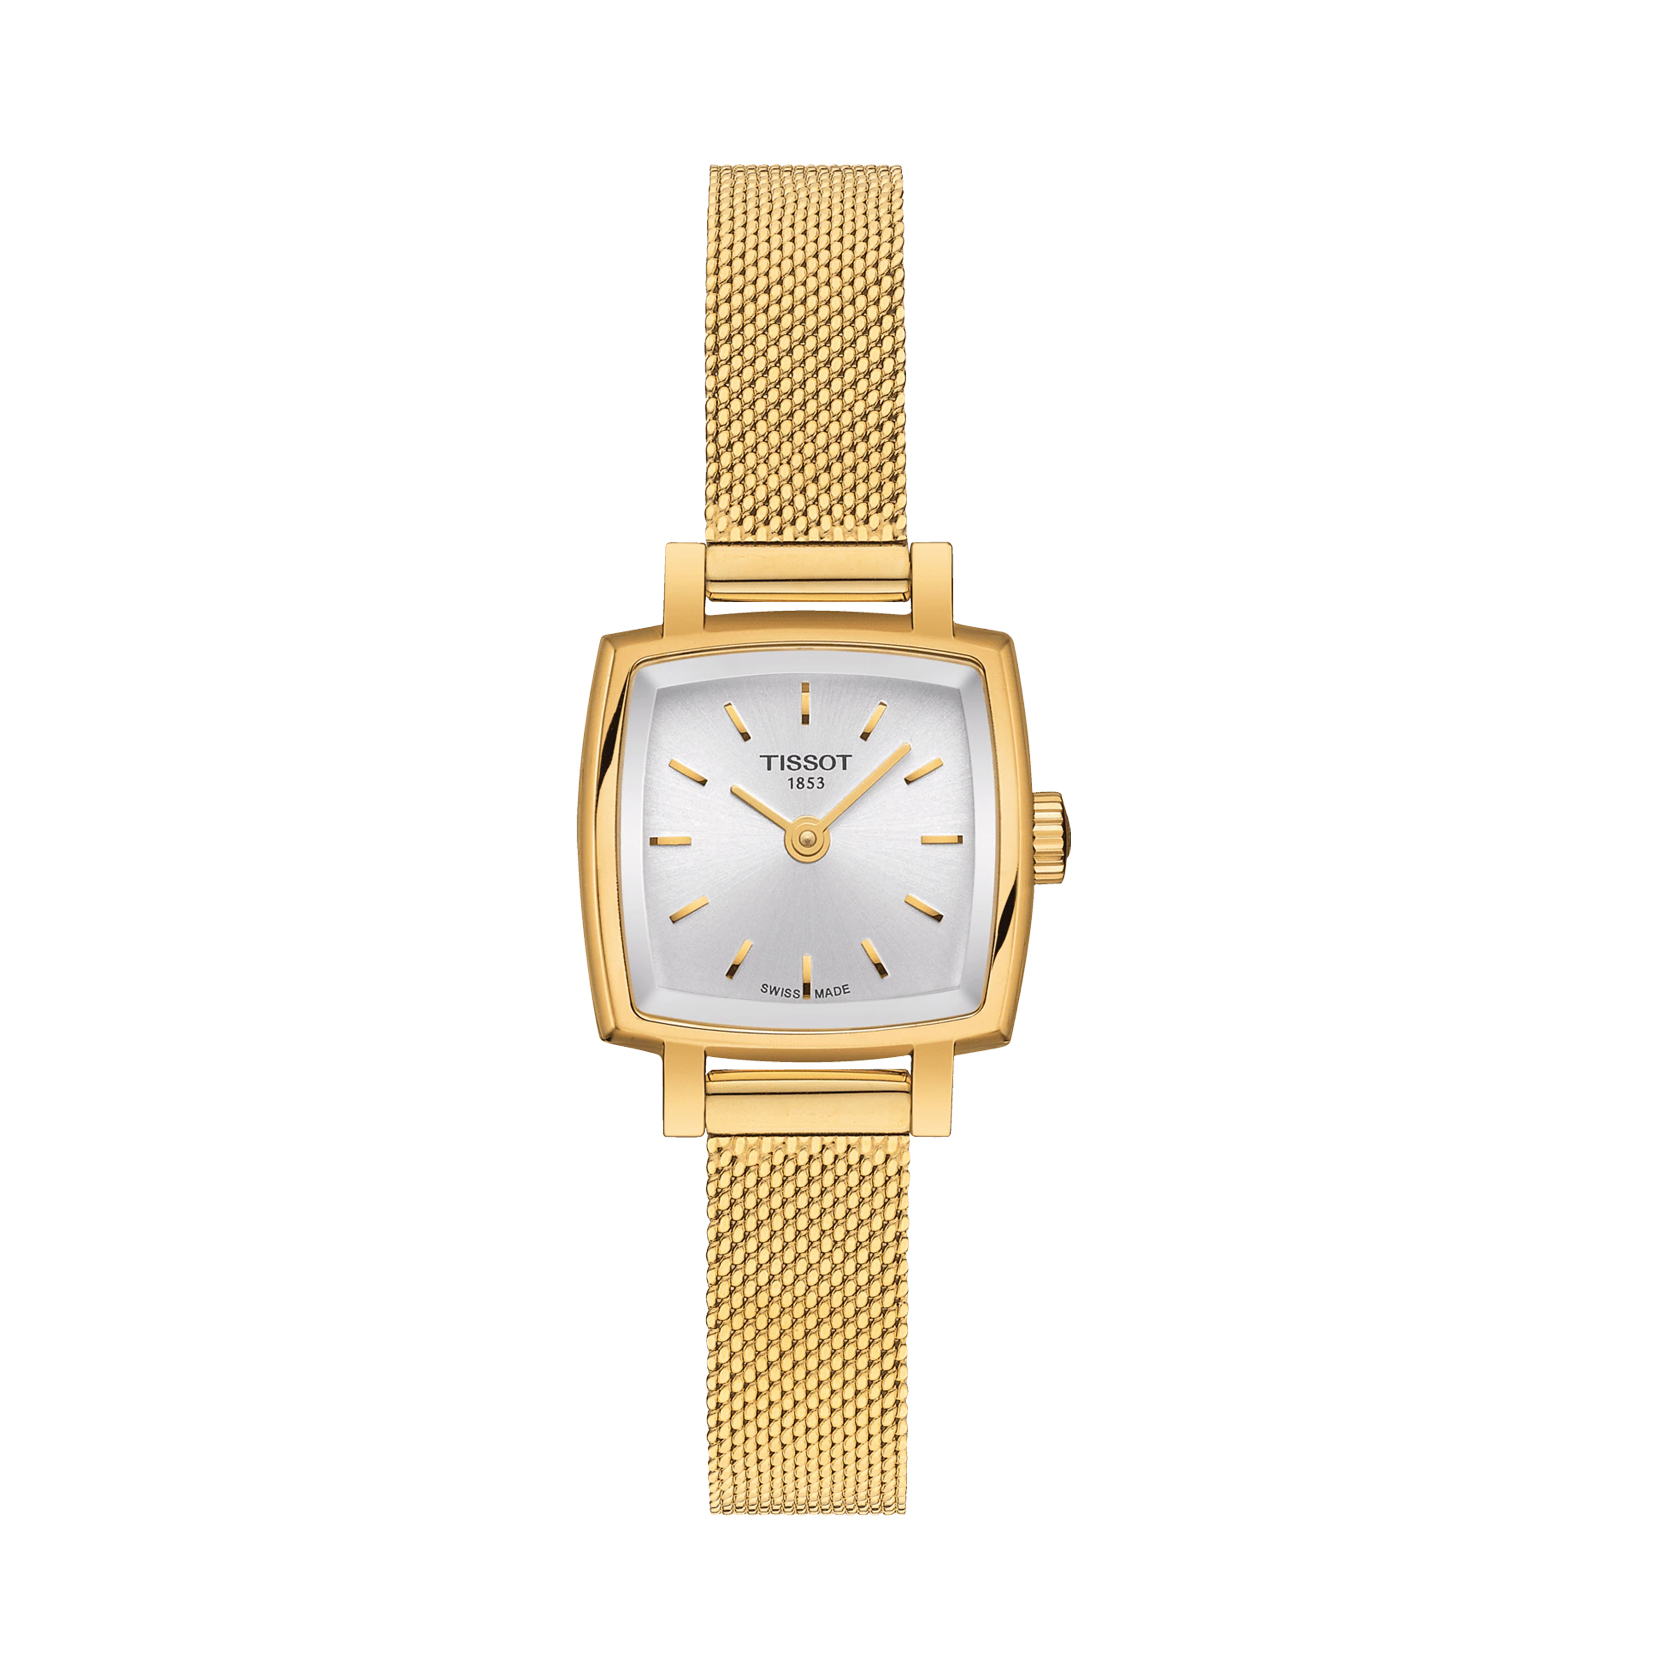 Tissot T-Lady Lovely Square Watch - Yellow Gold